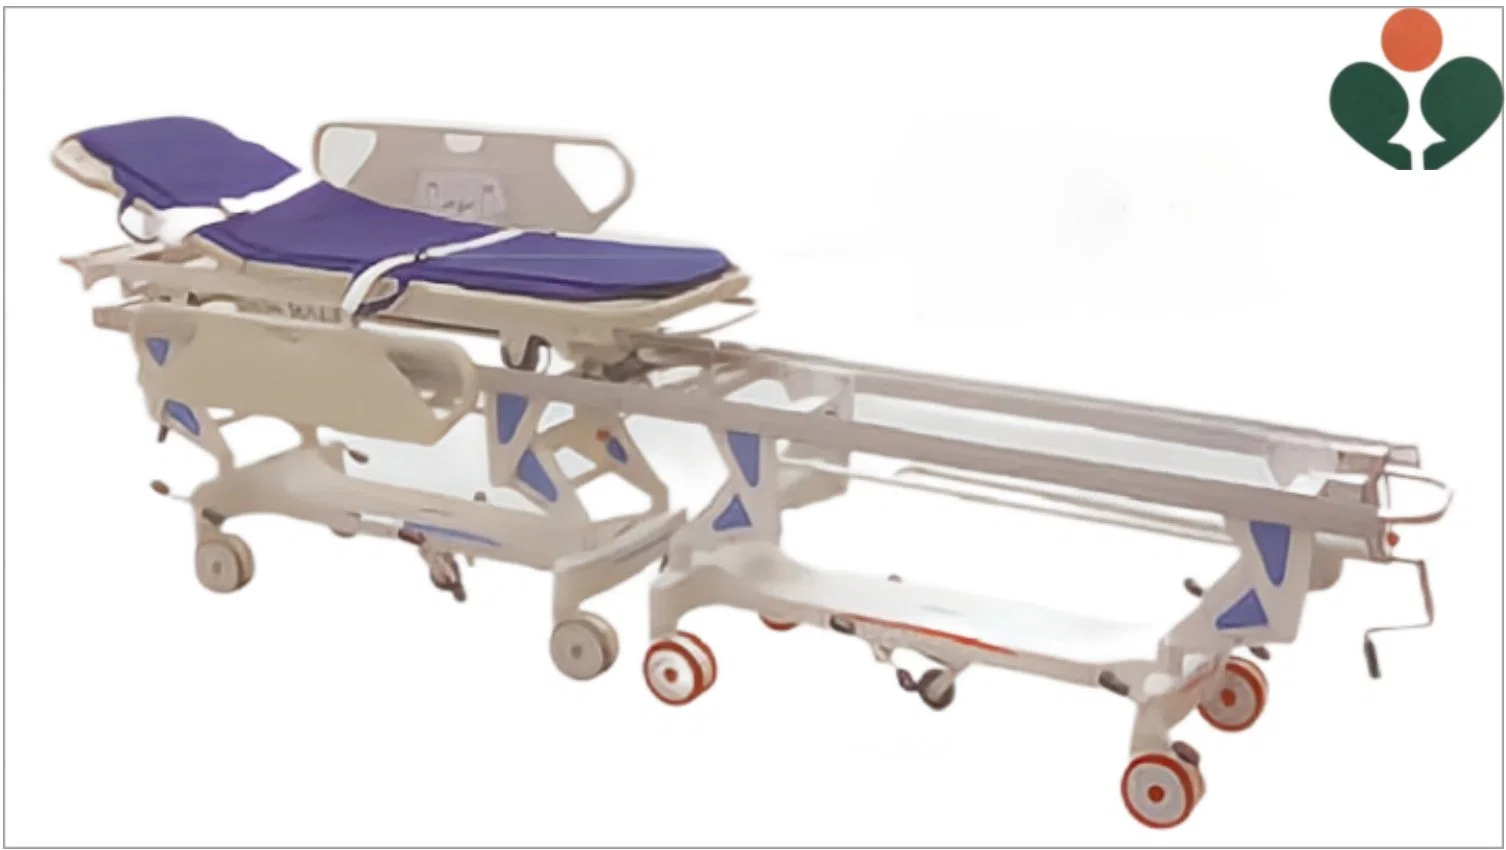 Medical Operation Connecting Trolley Medical Bed Medical Equipment